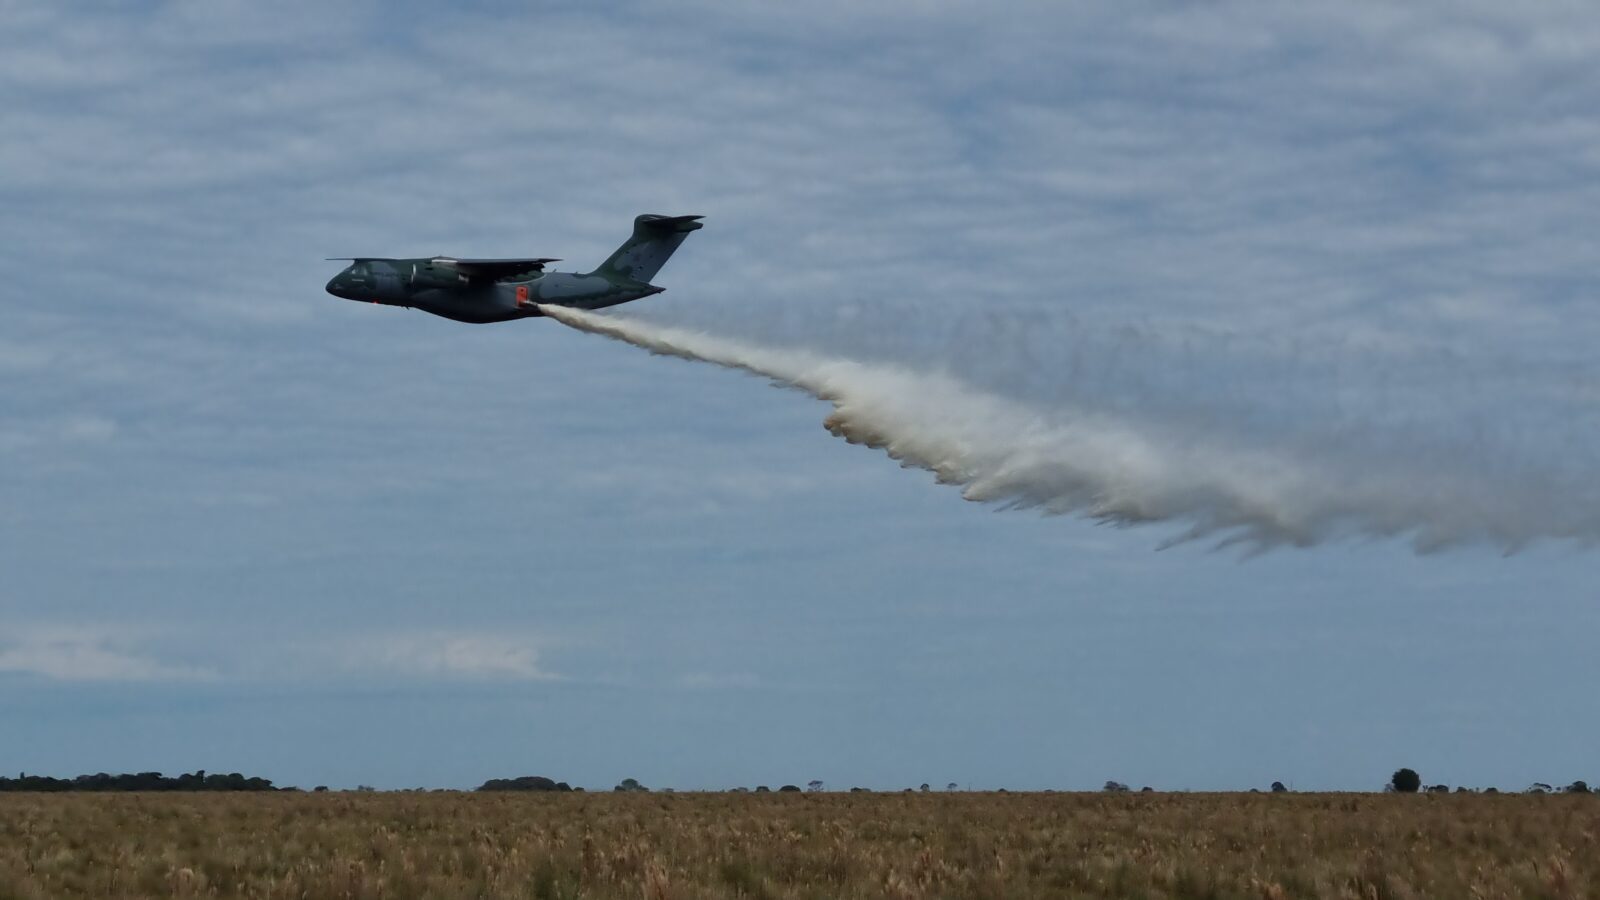 1st GTT conducts in-flight firefighting training with the KC-390